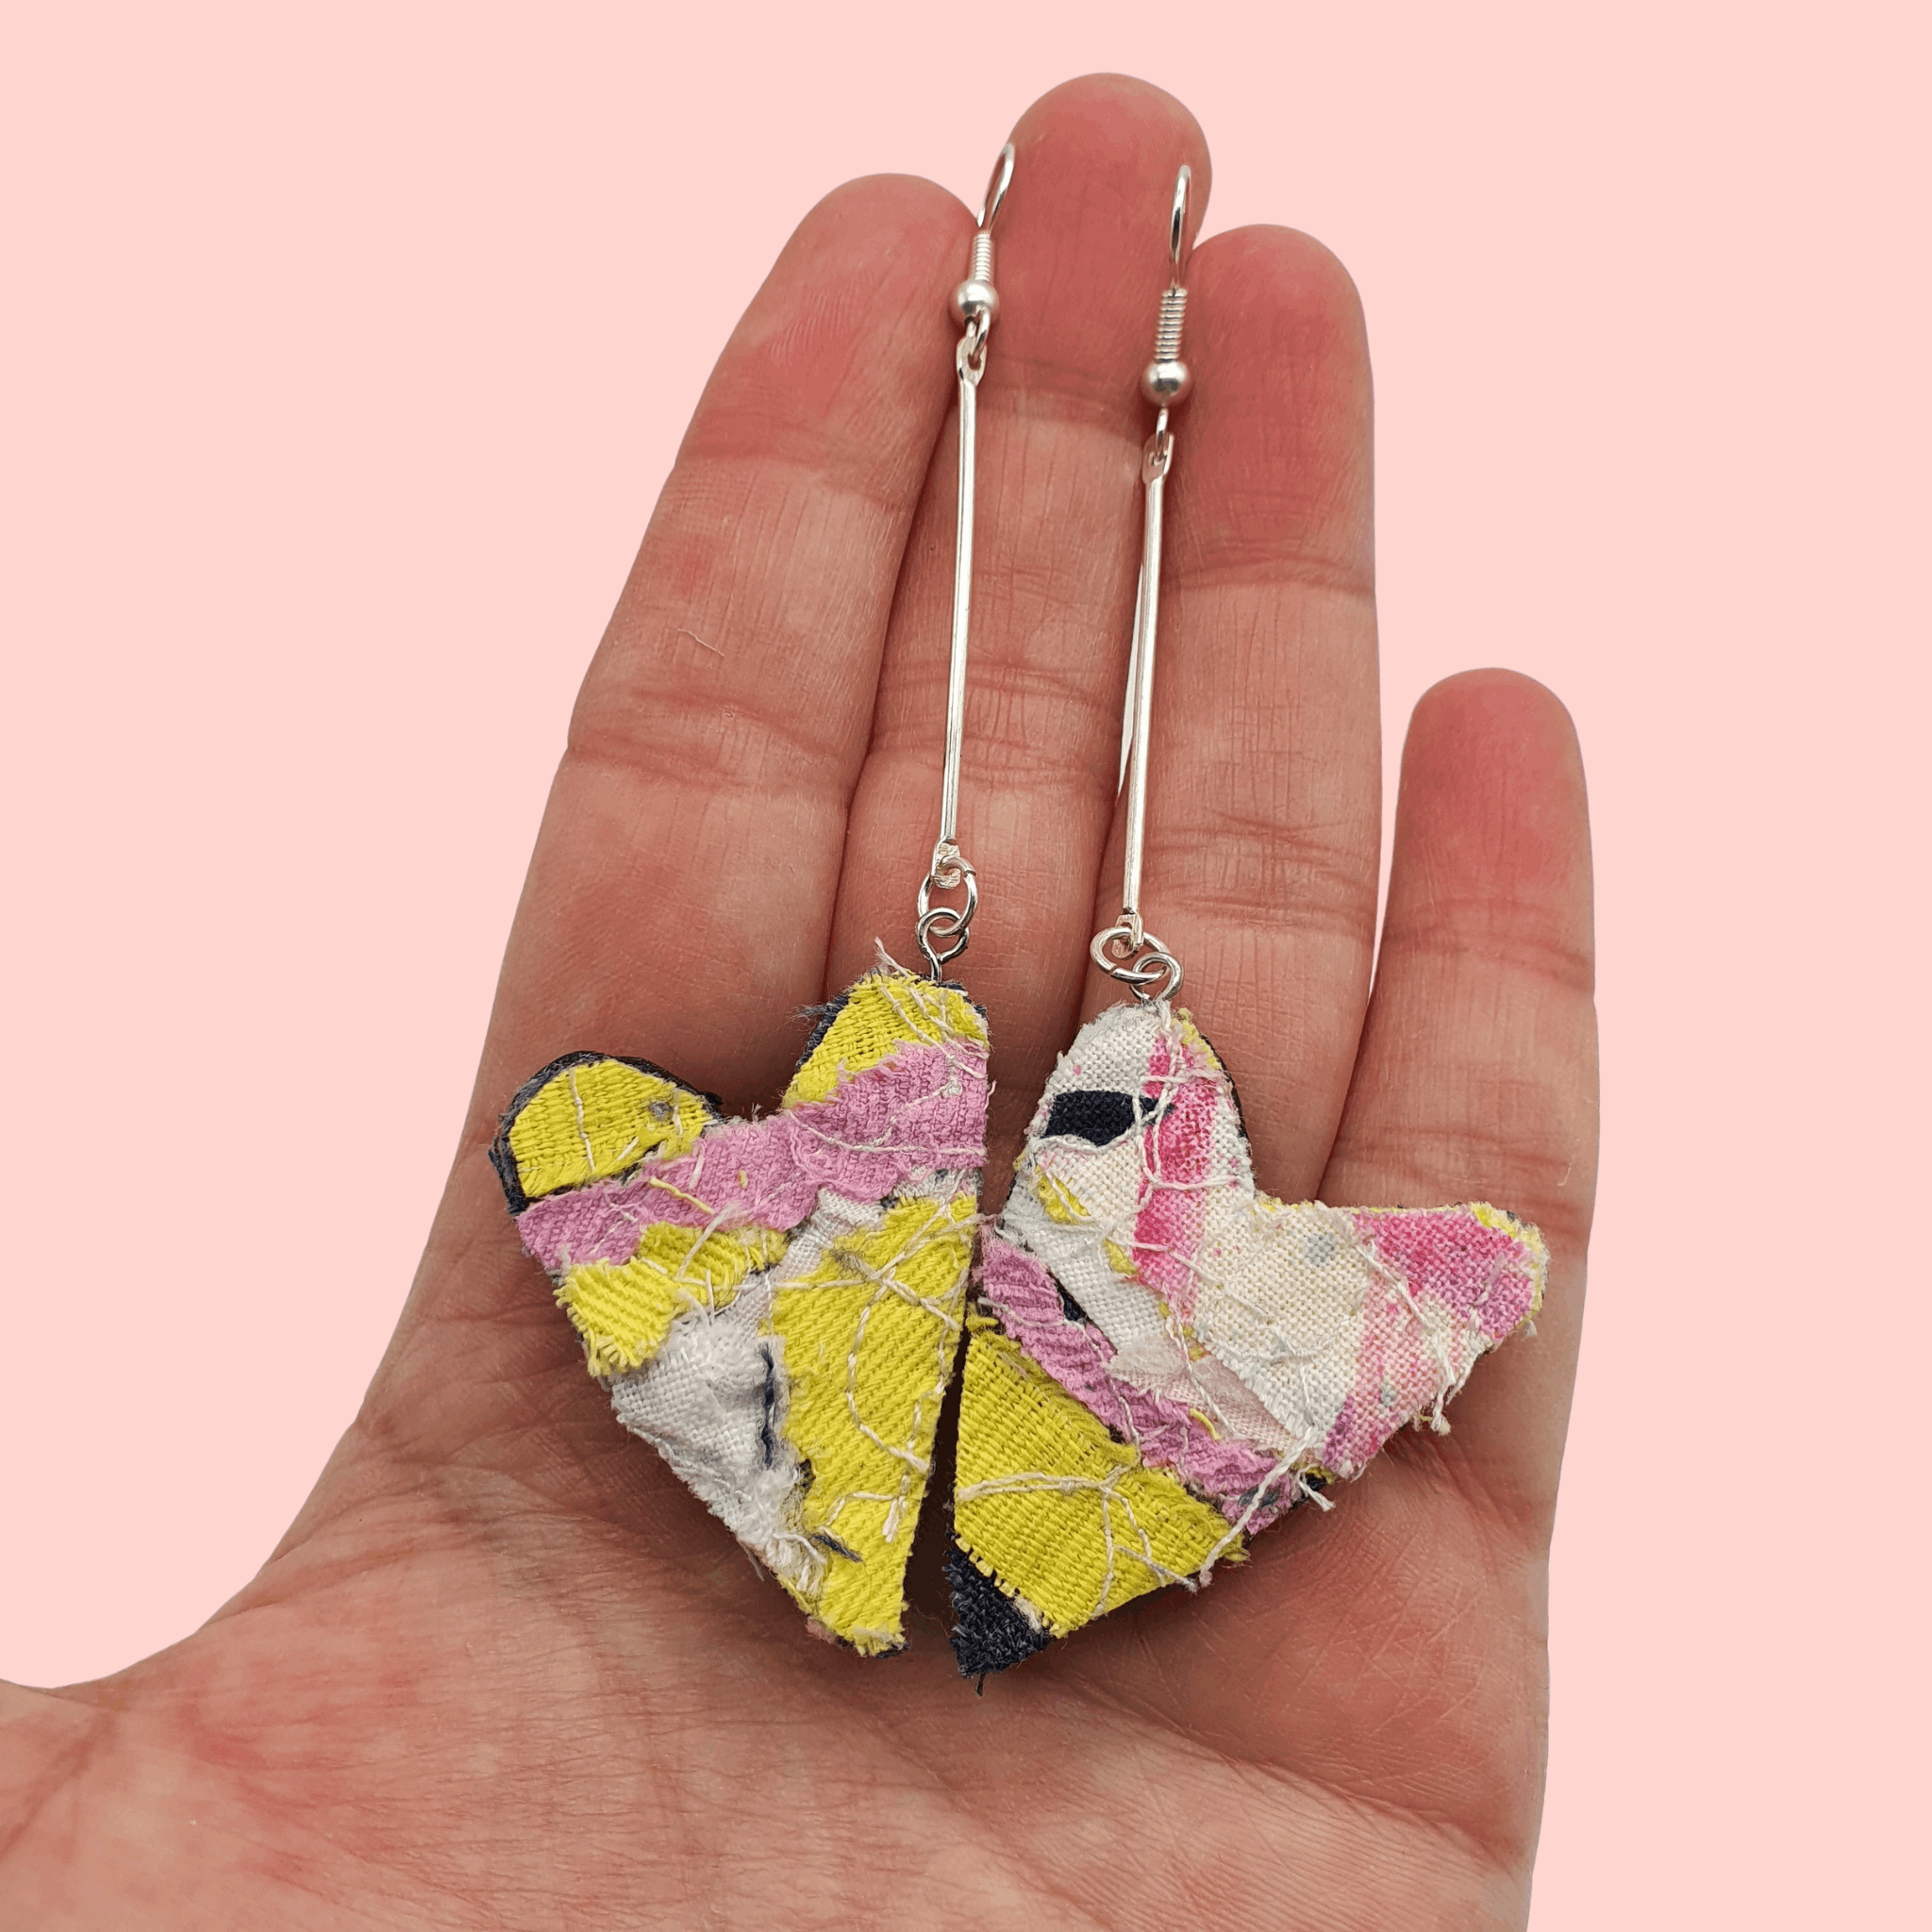 Heart shaped pink and yellow dangle earrings with a silver plated bar.